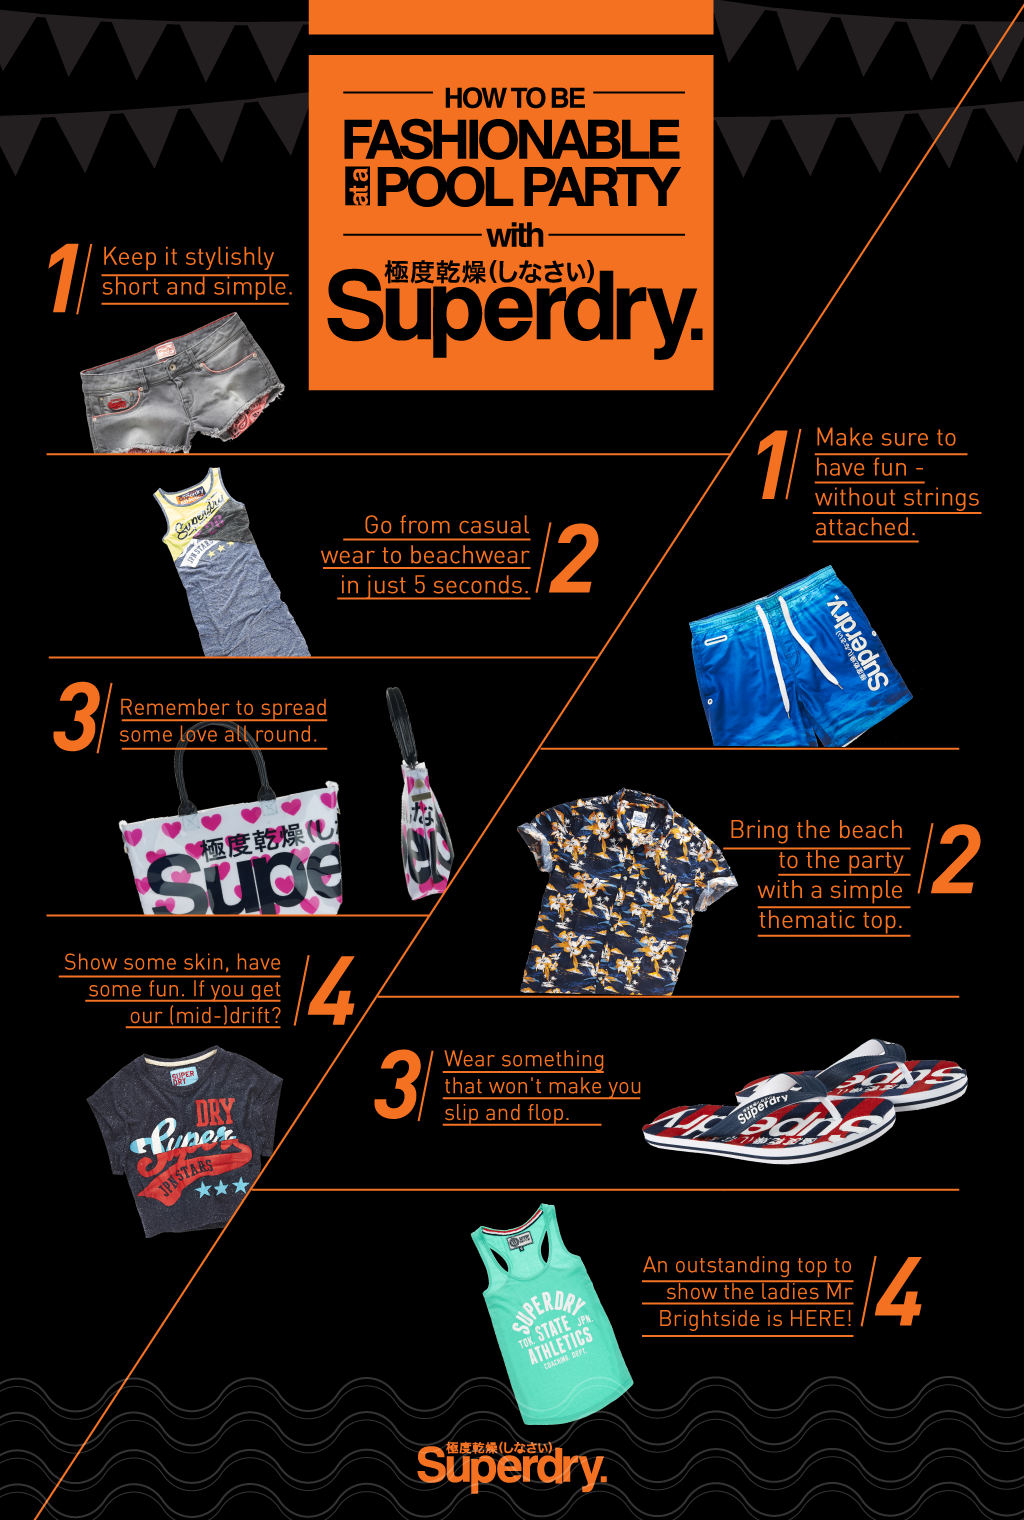 source: Superdry